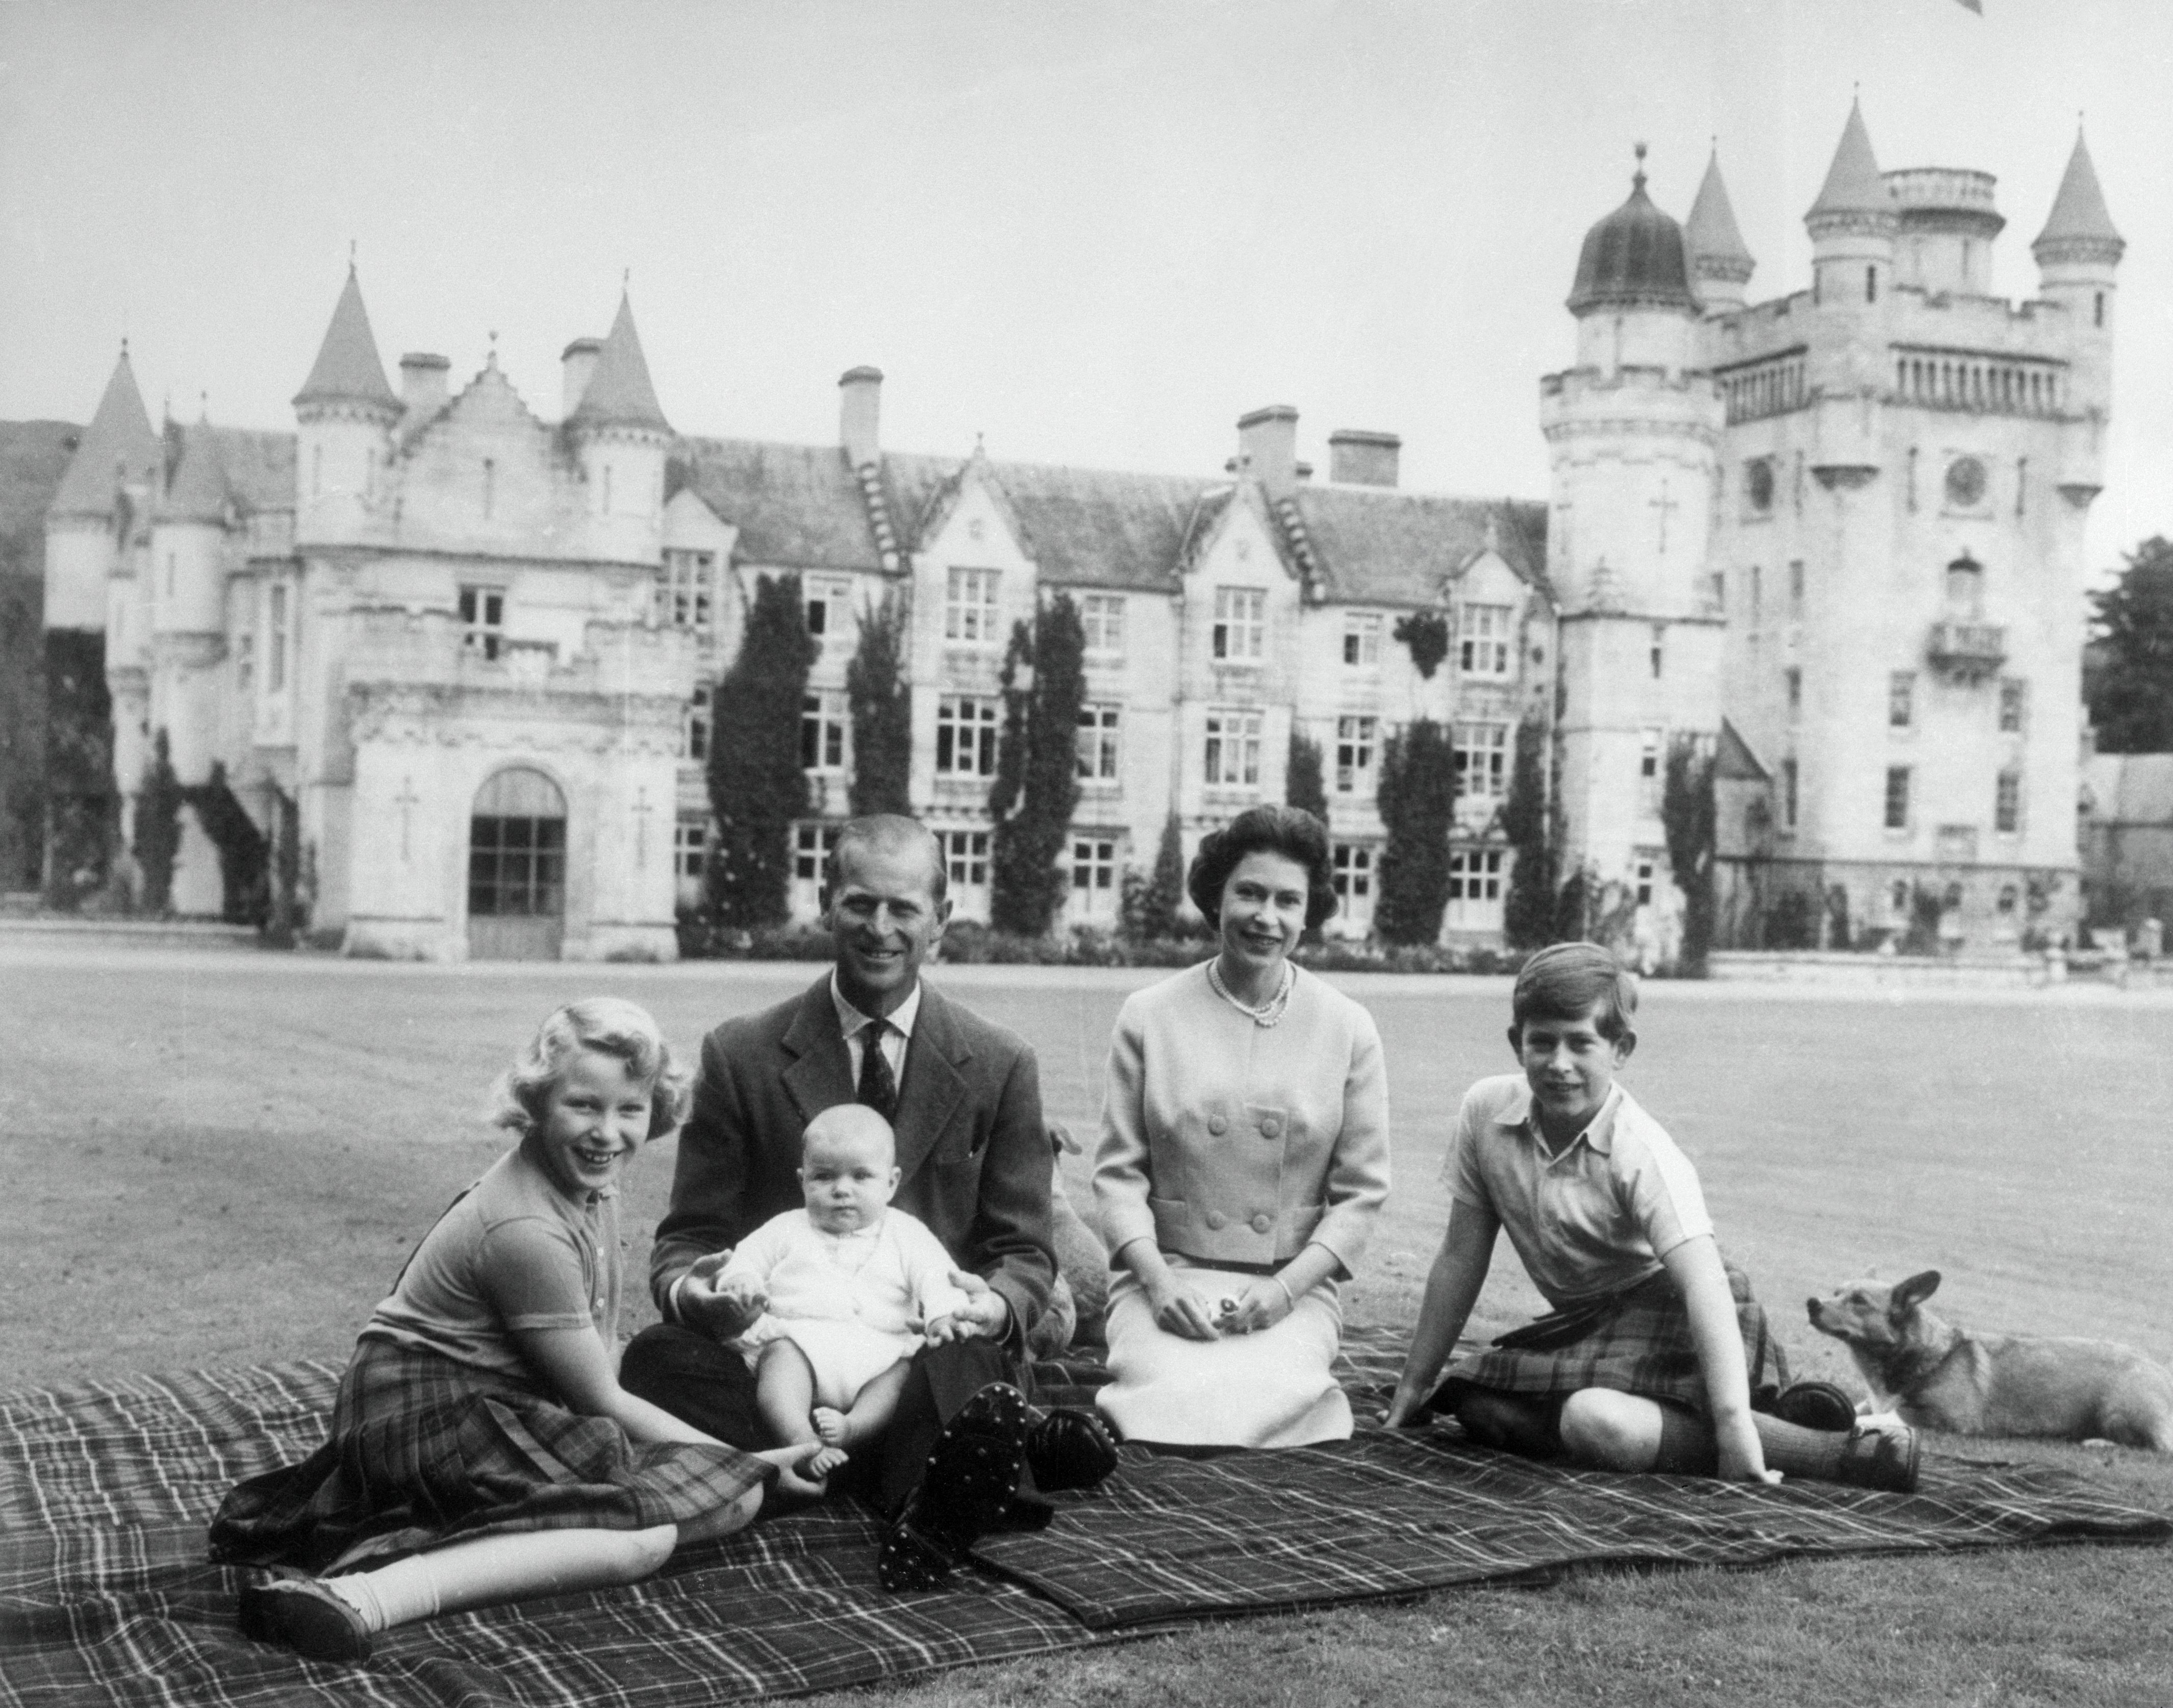  Queen Elizabeth II and Prince Philip, with their children, Prince Andrew (centre), Princess Anne (left) and Charles, sitting on a picnic rug outside Balmoral Castle in Scotland, 8th September 1960. | Source: Getty Images